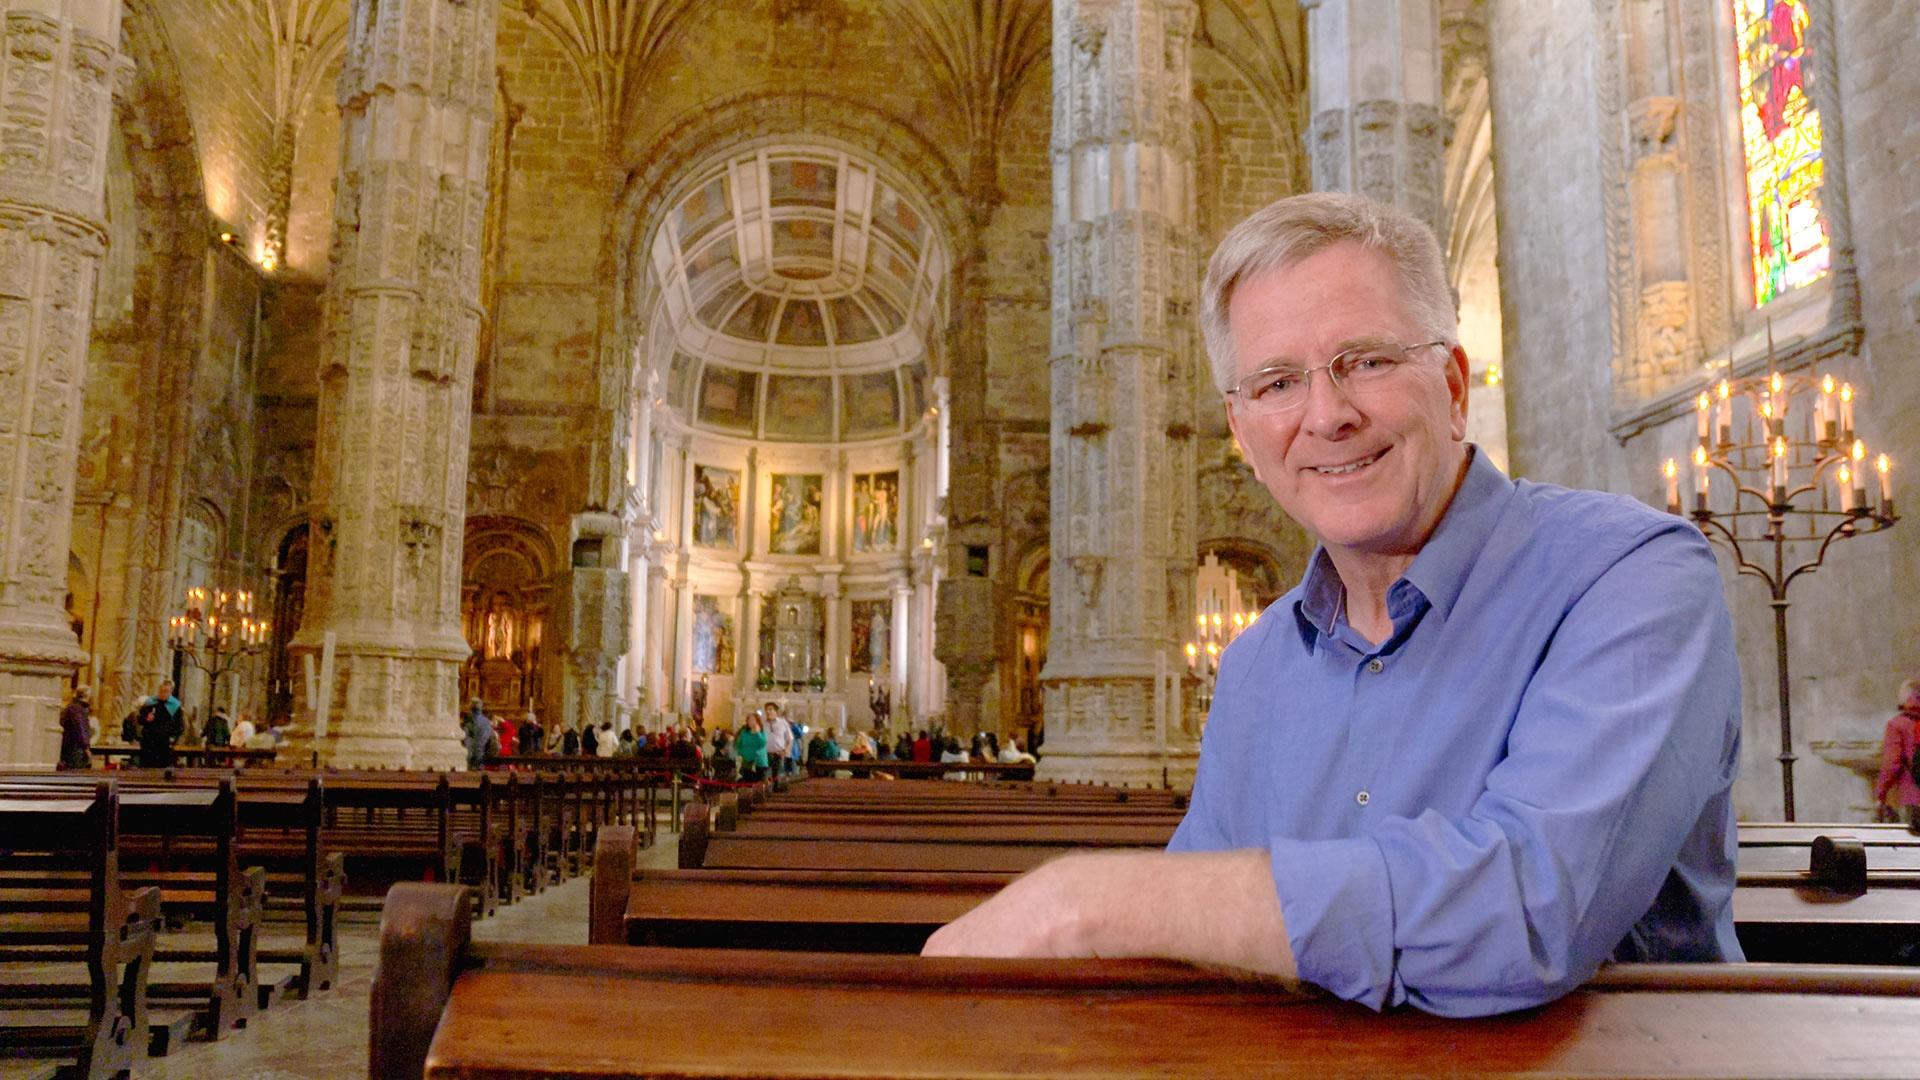 Rick Steves' Europe, Rick Steves' Europe: Art of the Impressionists and  Beyond, Season 12, Episode 1211